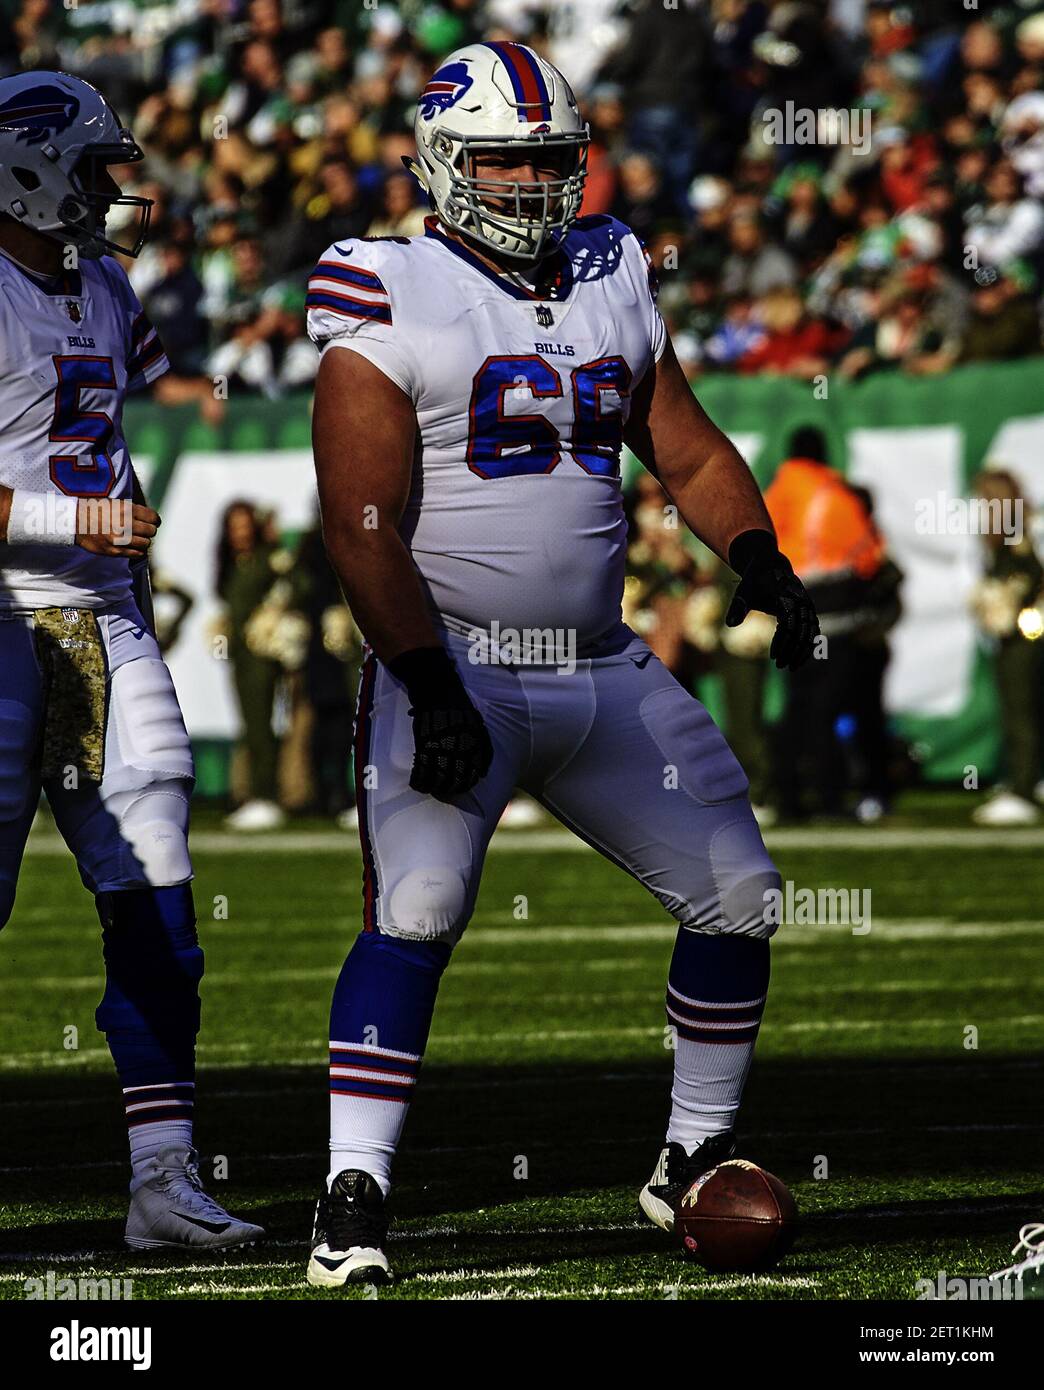 November 11, 2018 - East Rutherford, New Jersey, U.S. - Buffalo Bills  center Russell Bodine (66) during a NFL game between the Buffalo Bills and  the New York Jets at MetLife Stadium